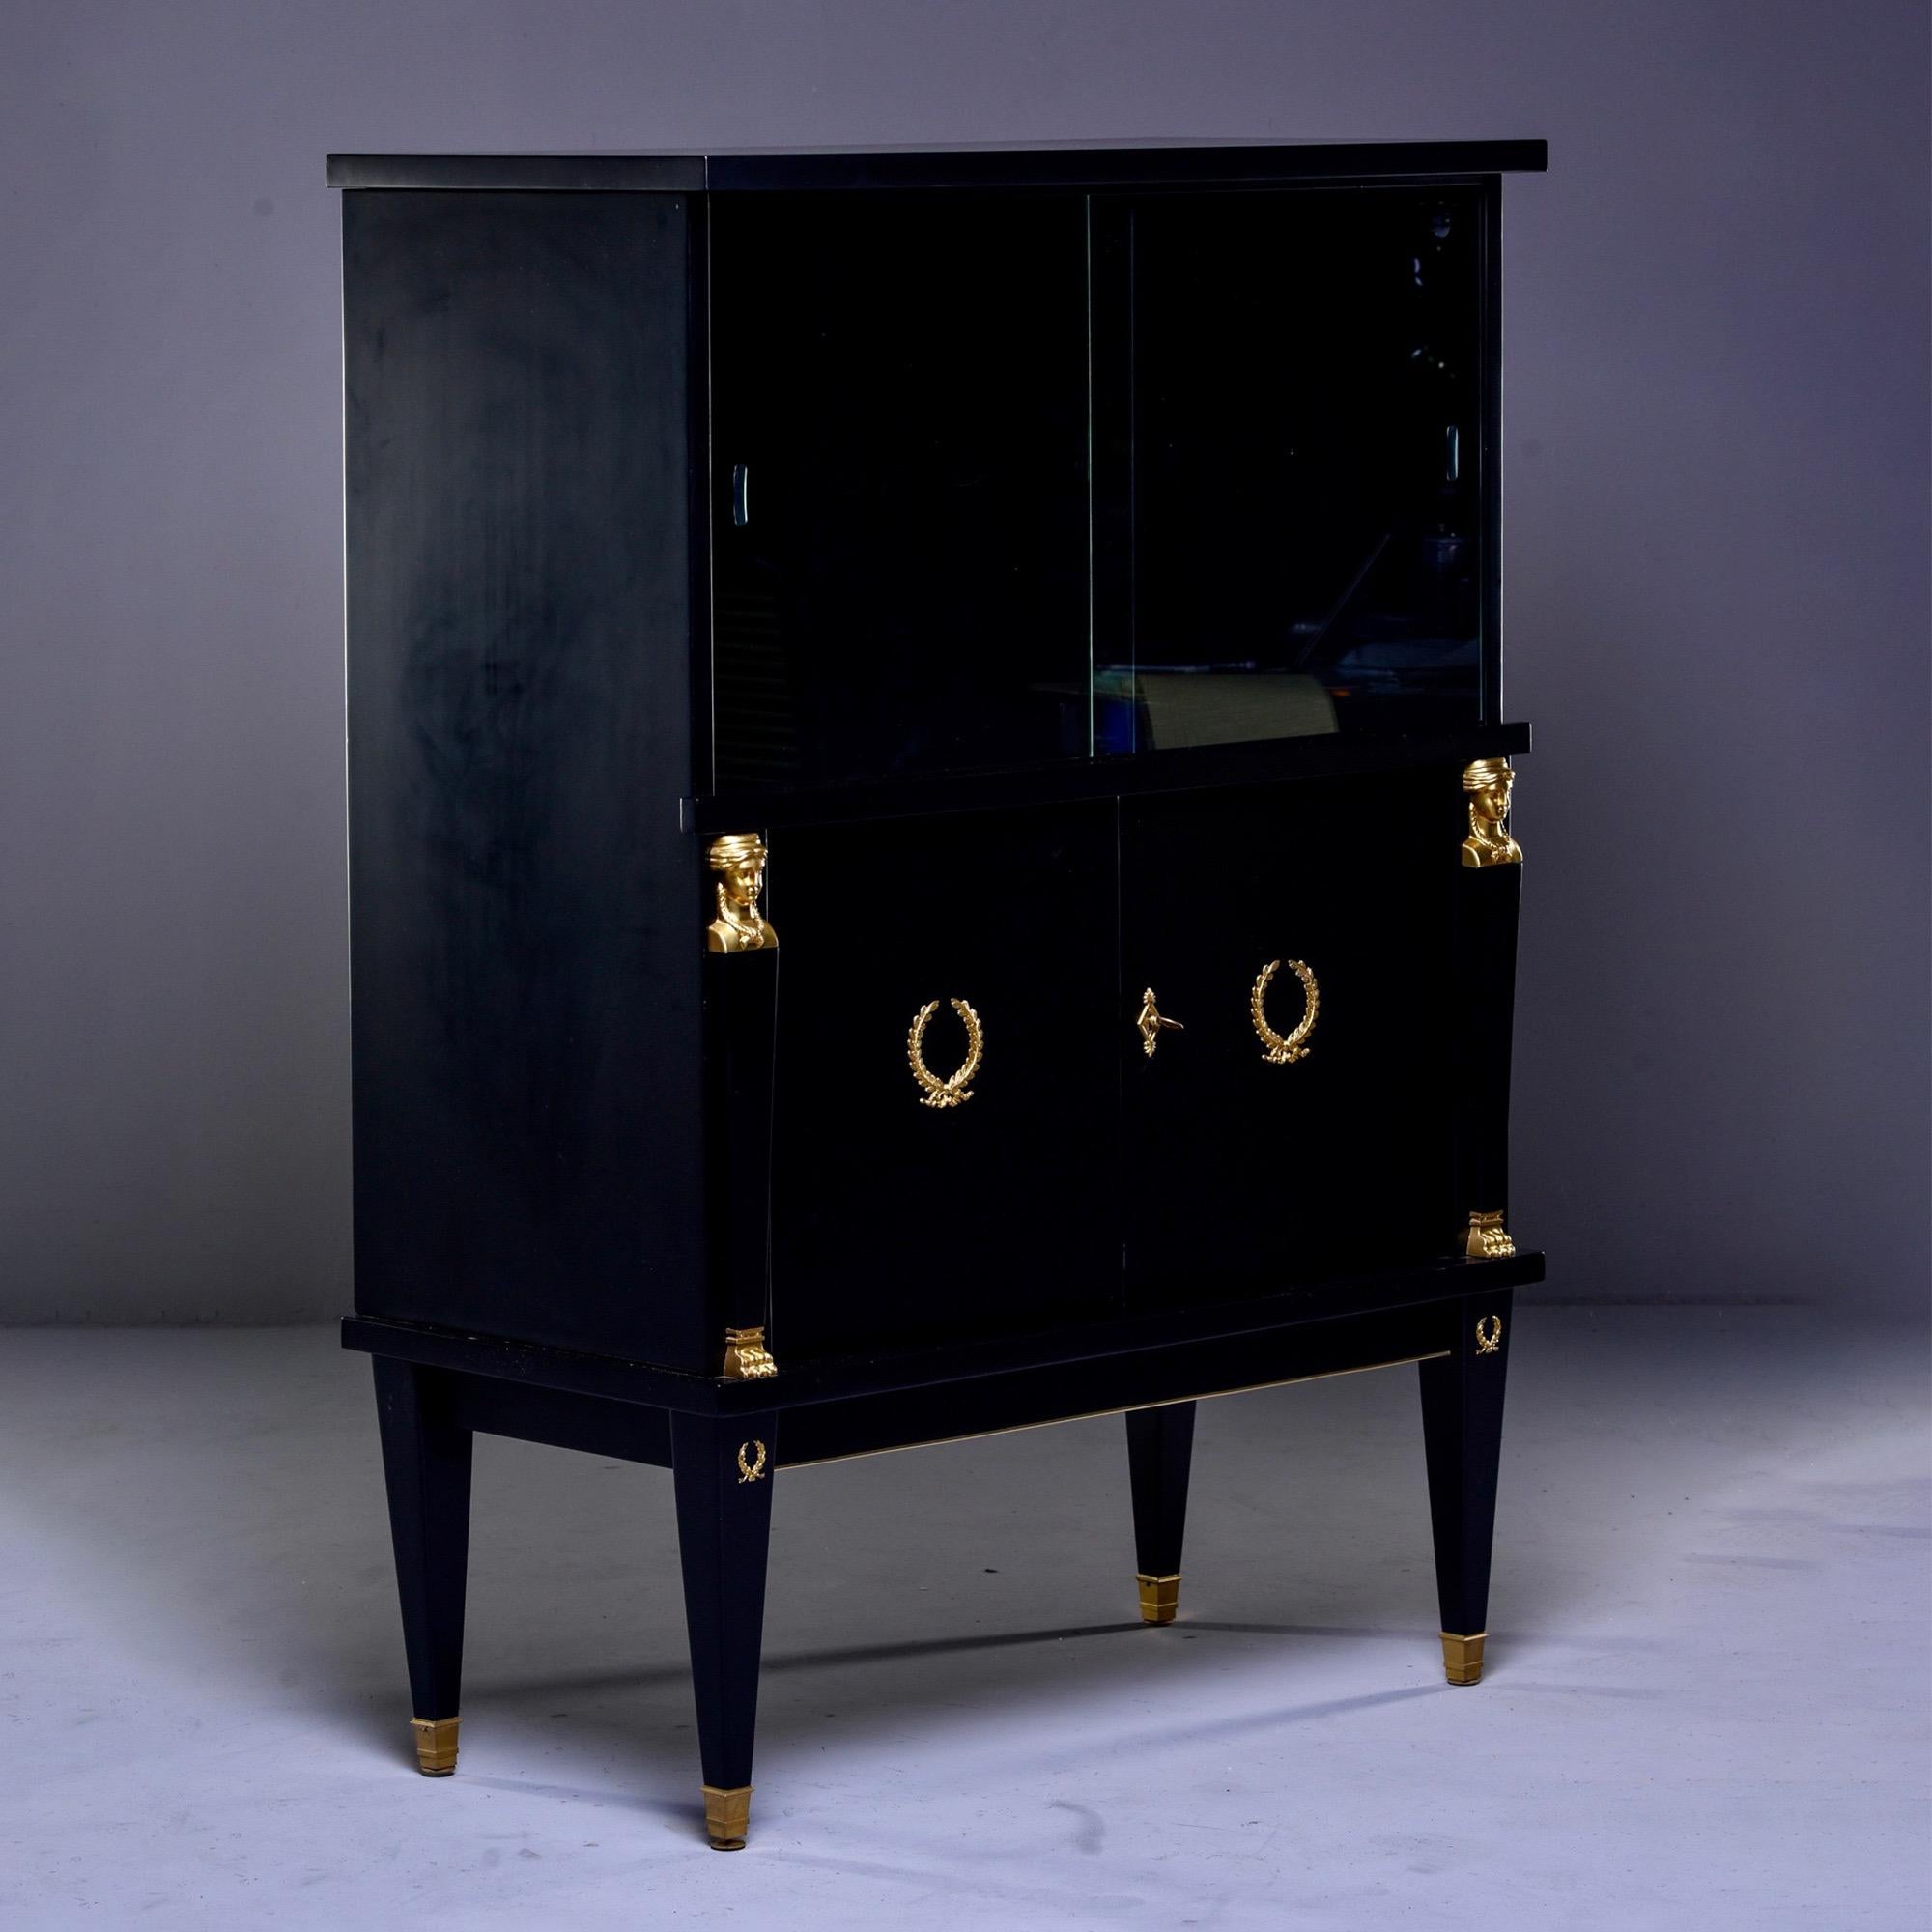 French vitrine cabinet or dry bar with new black finish and original brass trim, circa 1920s. Top has sliding glass doors. Bottom has brass figural ornaments, locking door and single internal shelf. Tapered legs with brass capped feet. Unknown maker.